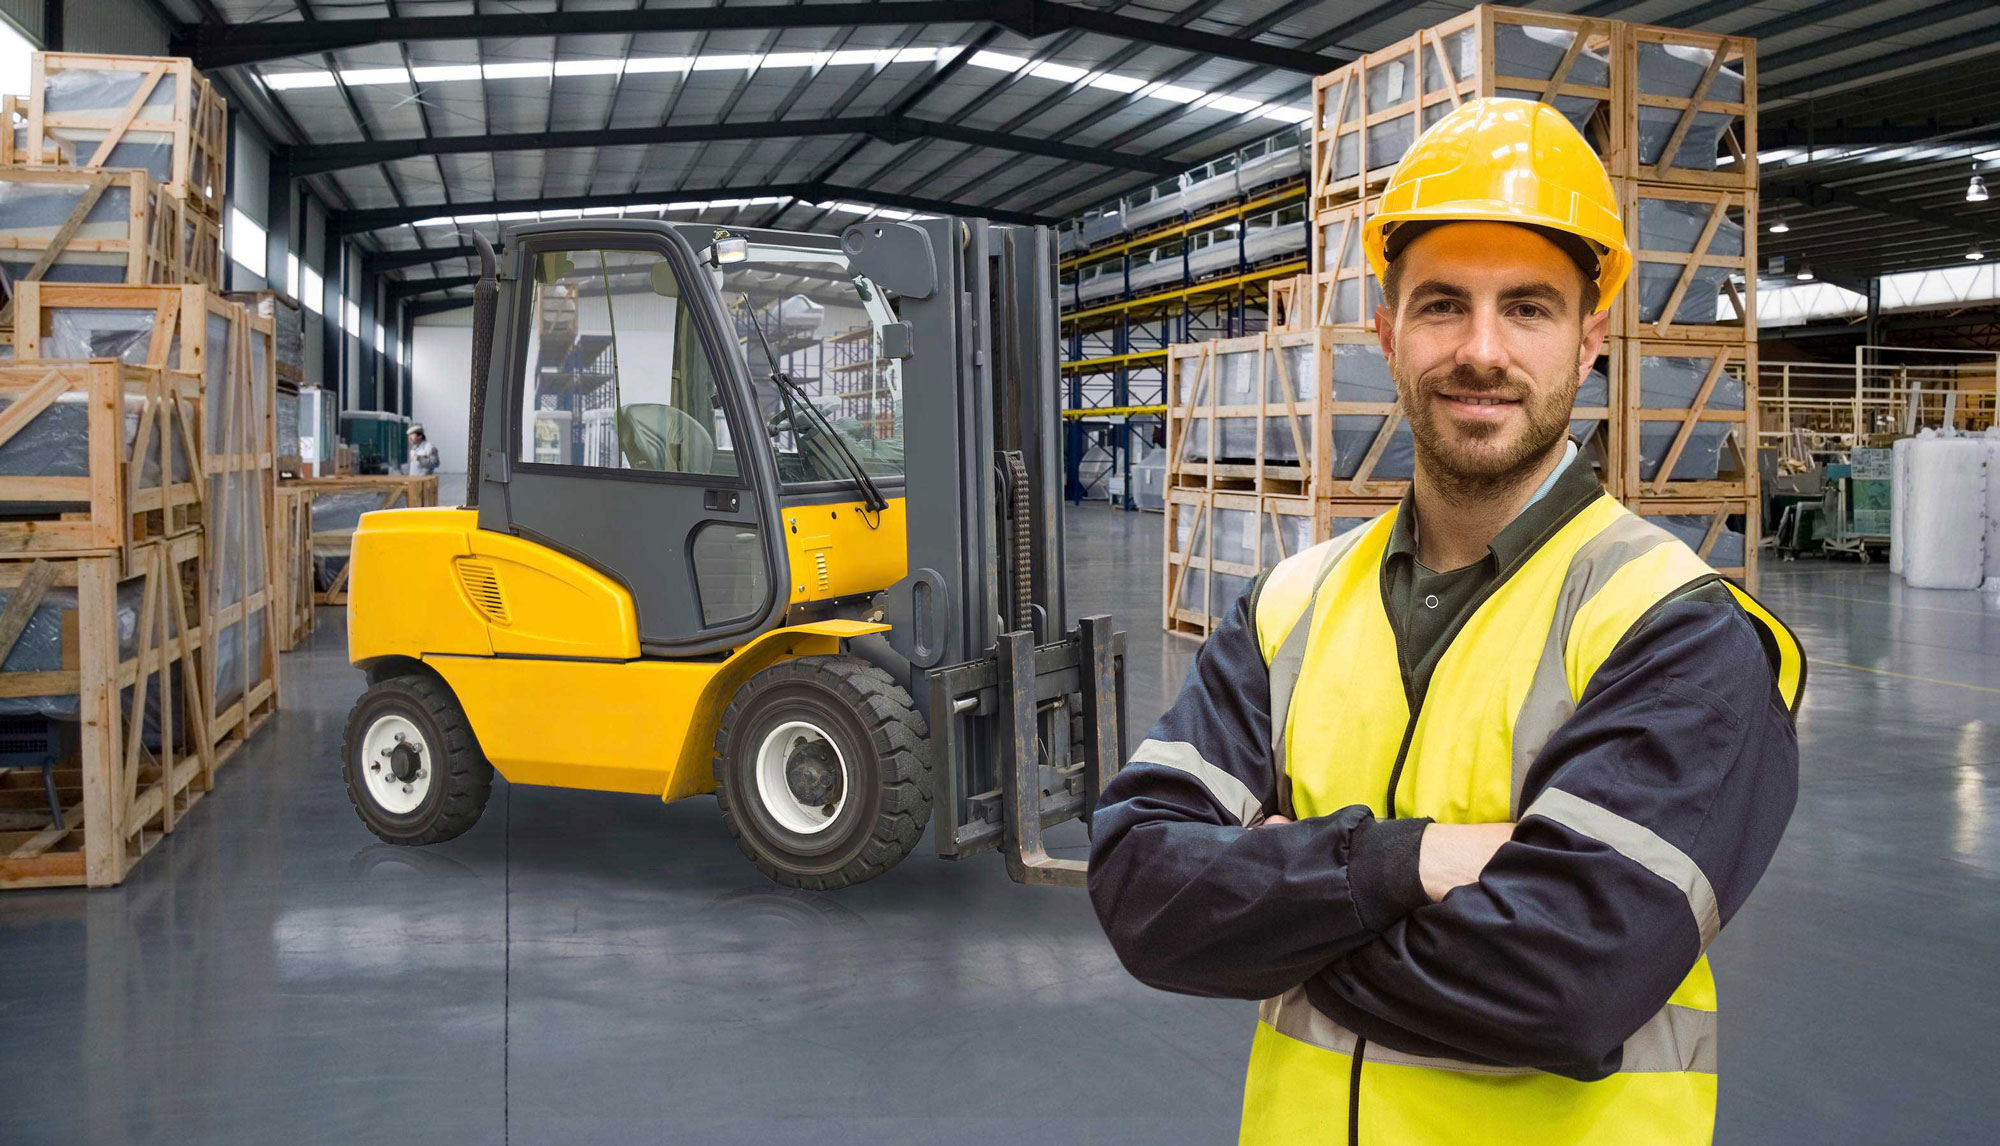 Types Of Forklift Training Certification Courses Prosap Forklift And Equipment Training